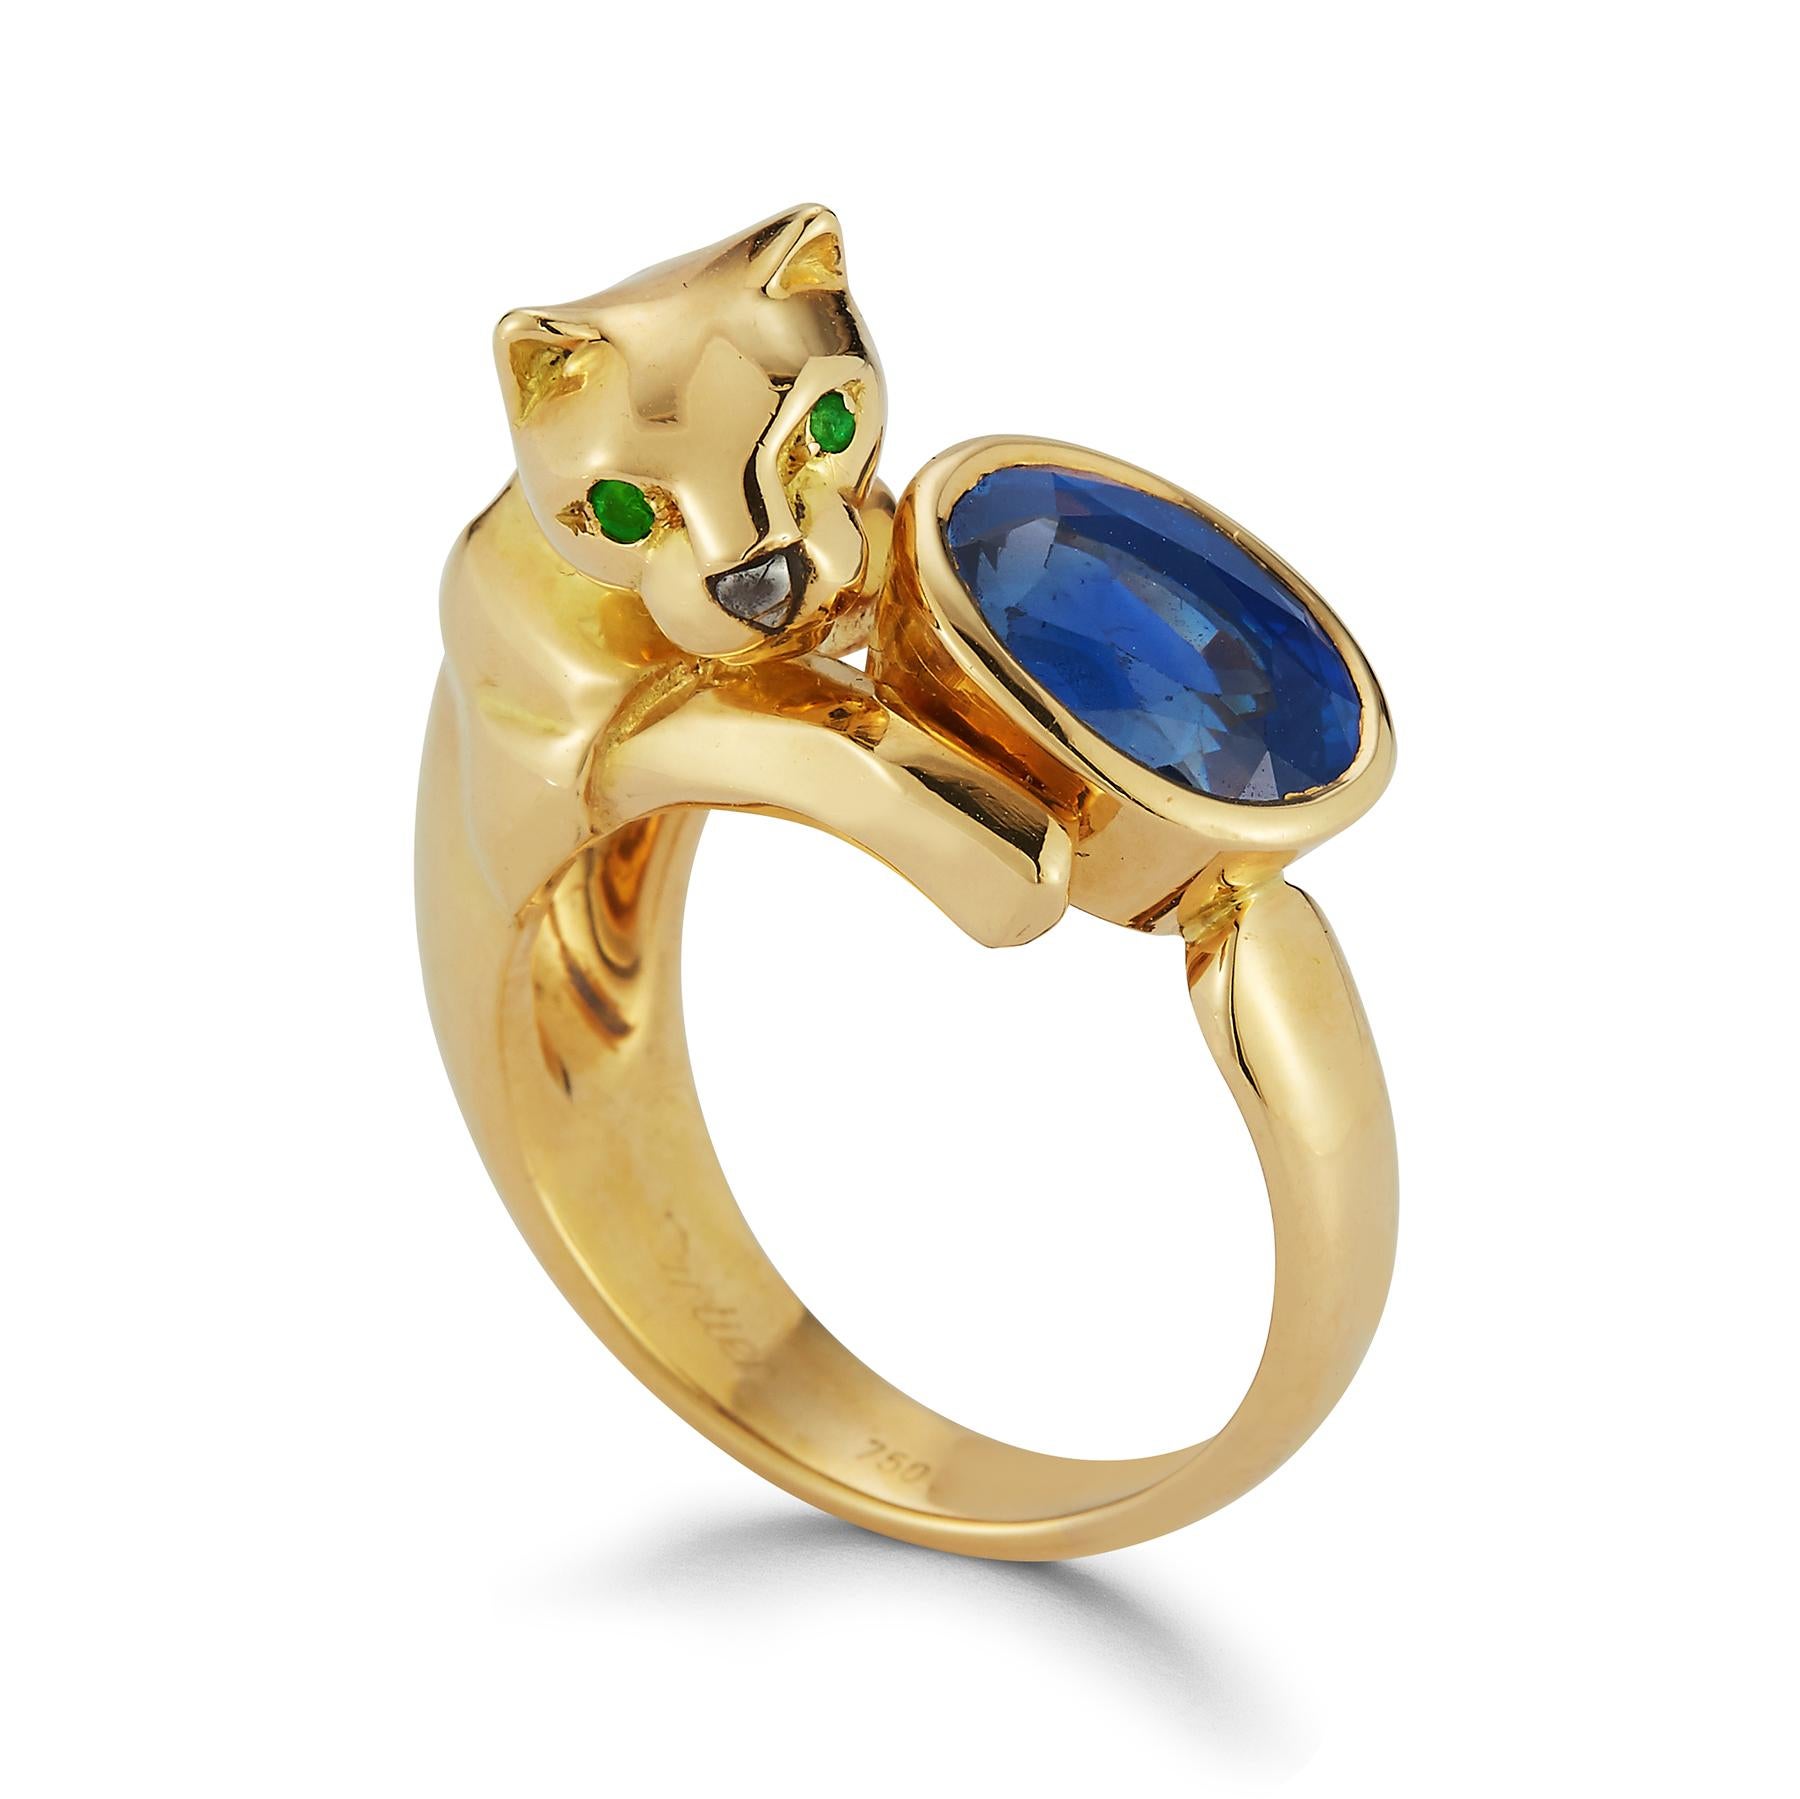 Cartier Sapphire Gold Panther Ring , 1 oval cut sapphire as the center. 2 round cut emeralds for the panther eye set in 18k yellow gold.

Sapphire Weight: approx 3.00 cts 

Size 5.5

Resizable 

Signed Cartier and numbered